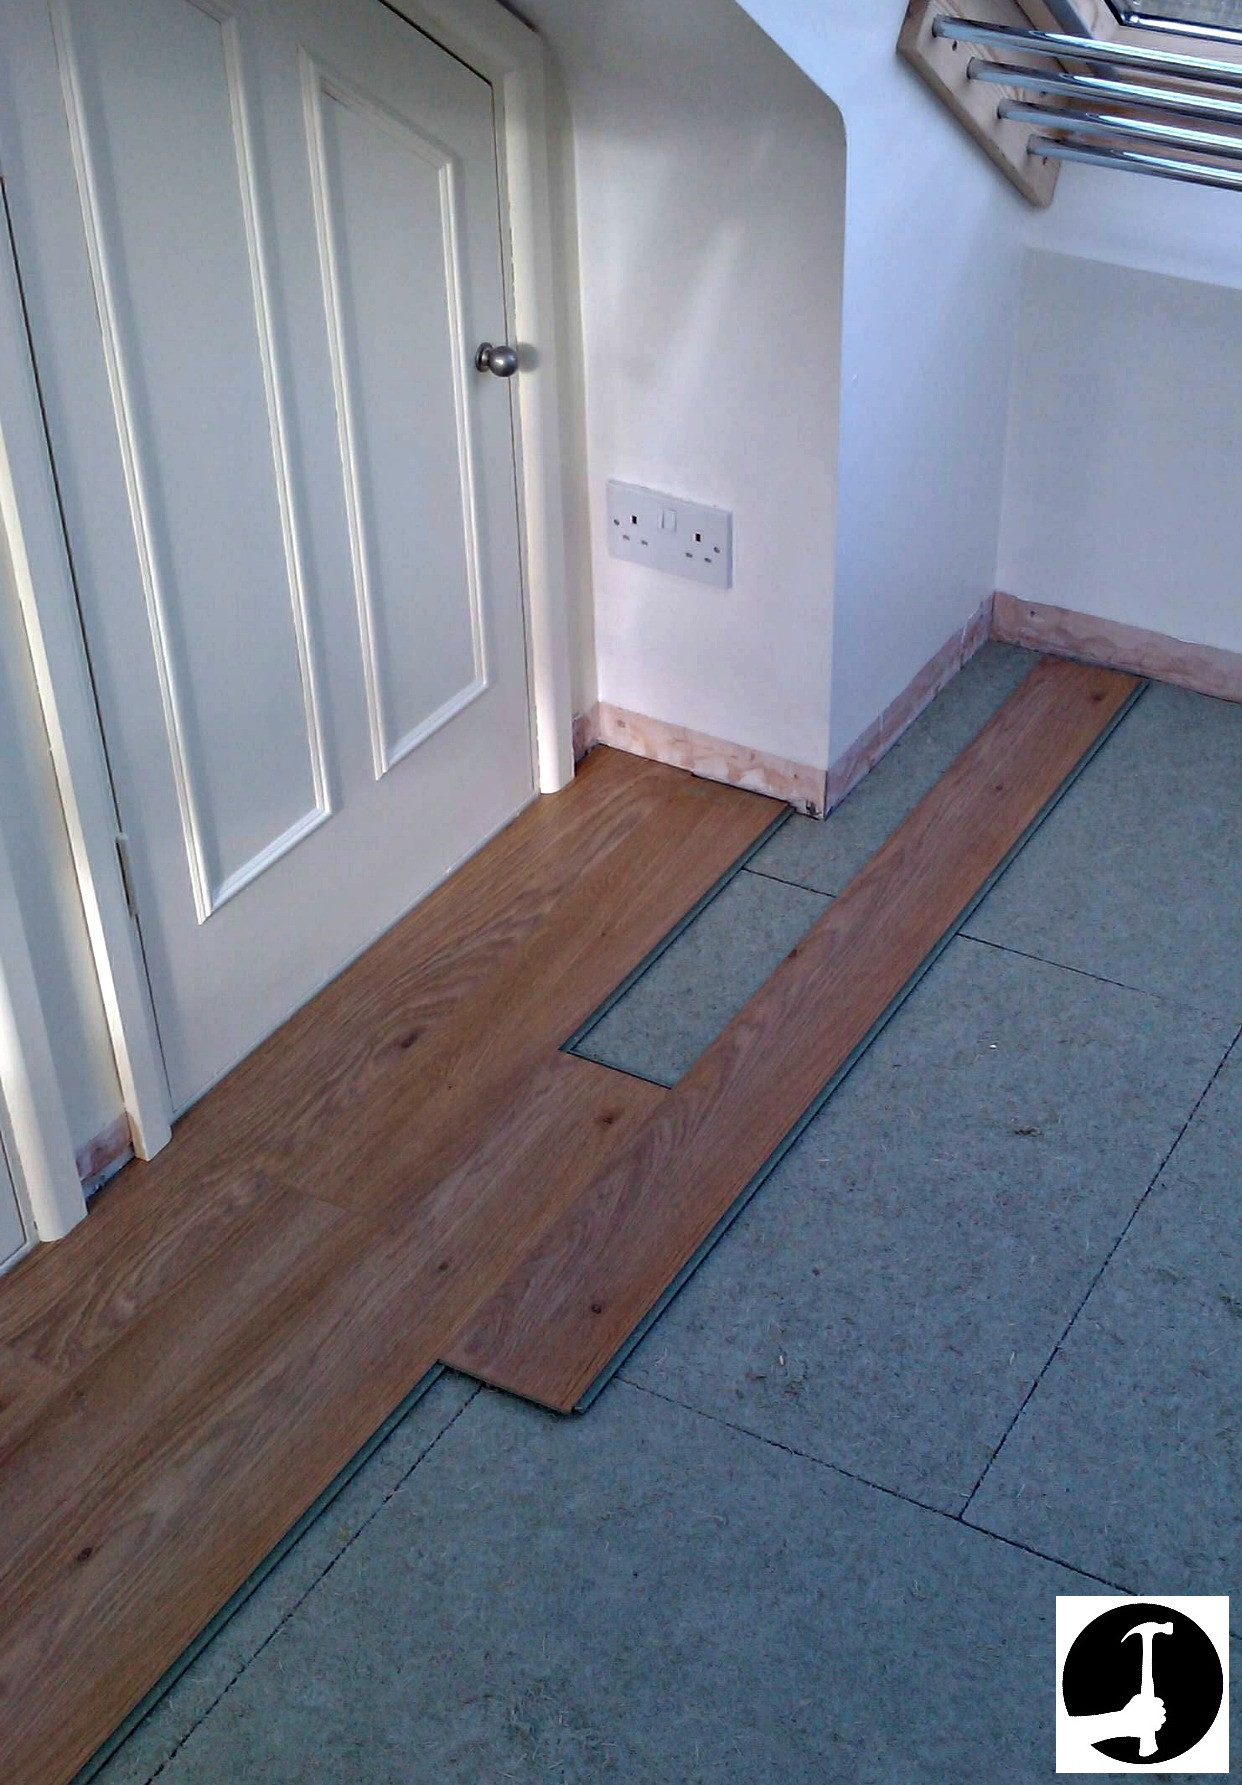 23 Elegant Hardwood Floor Installation Cost Bay area 2024 free download hardwood floor installation cost bay area of how to install laminate flooring with ease glued glue less systems with setting out laminate flooring